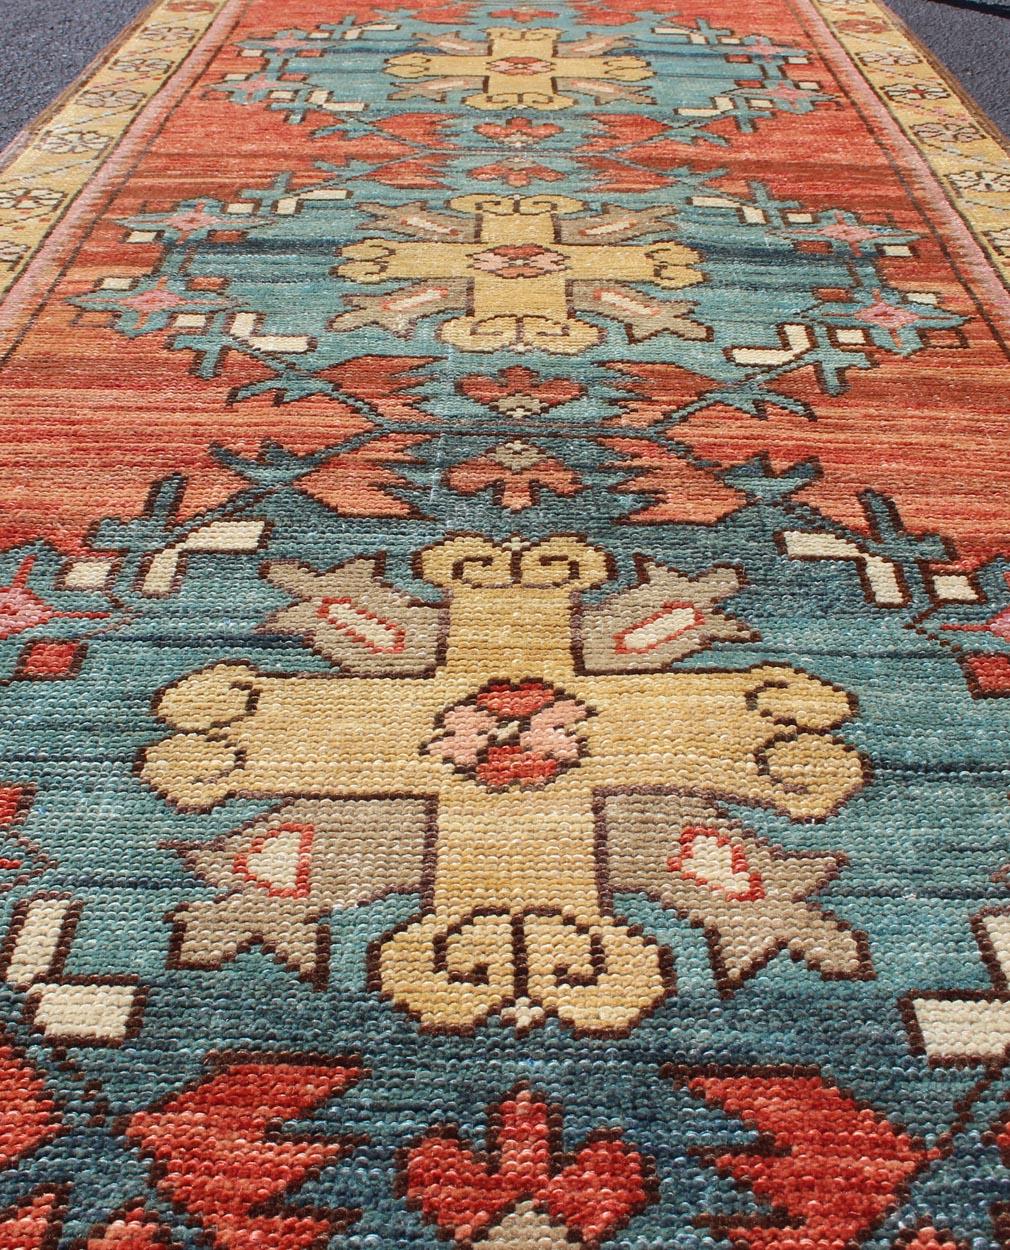 Turkish Colorful Antique Oushak Runner with Medallion Design in Terracotta & teal Blue For Sale